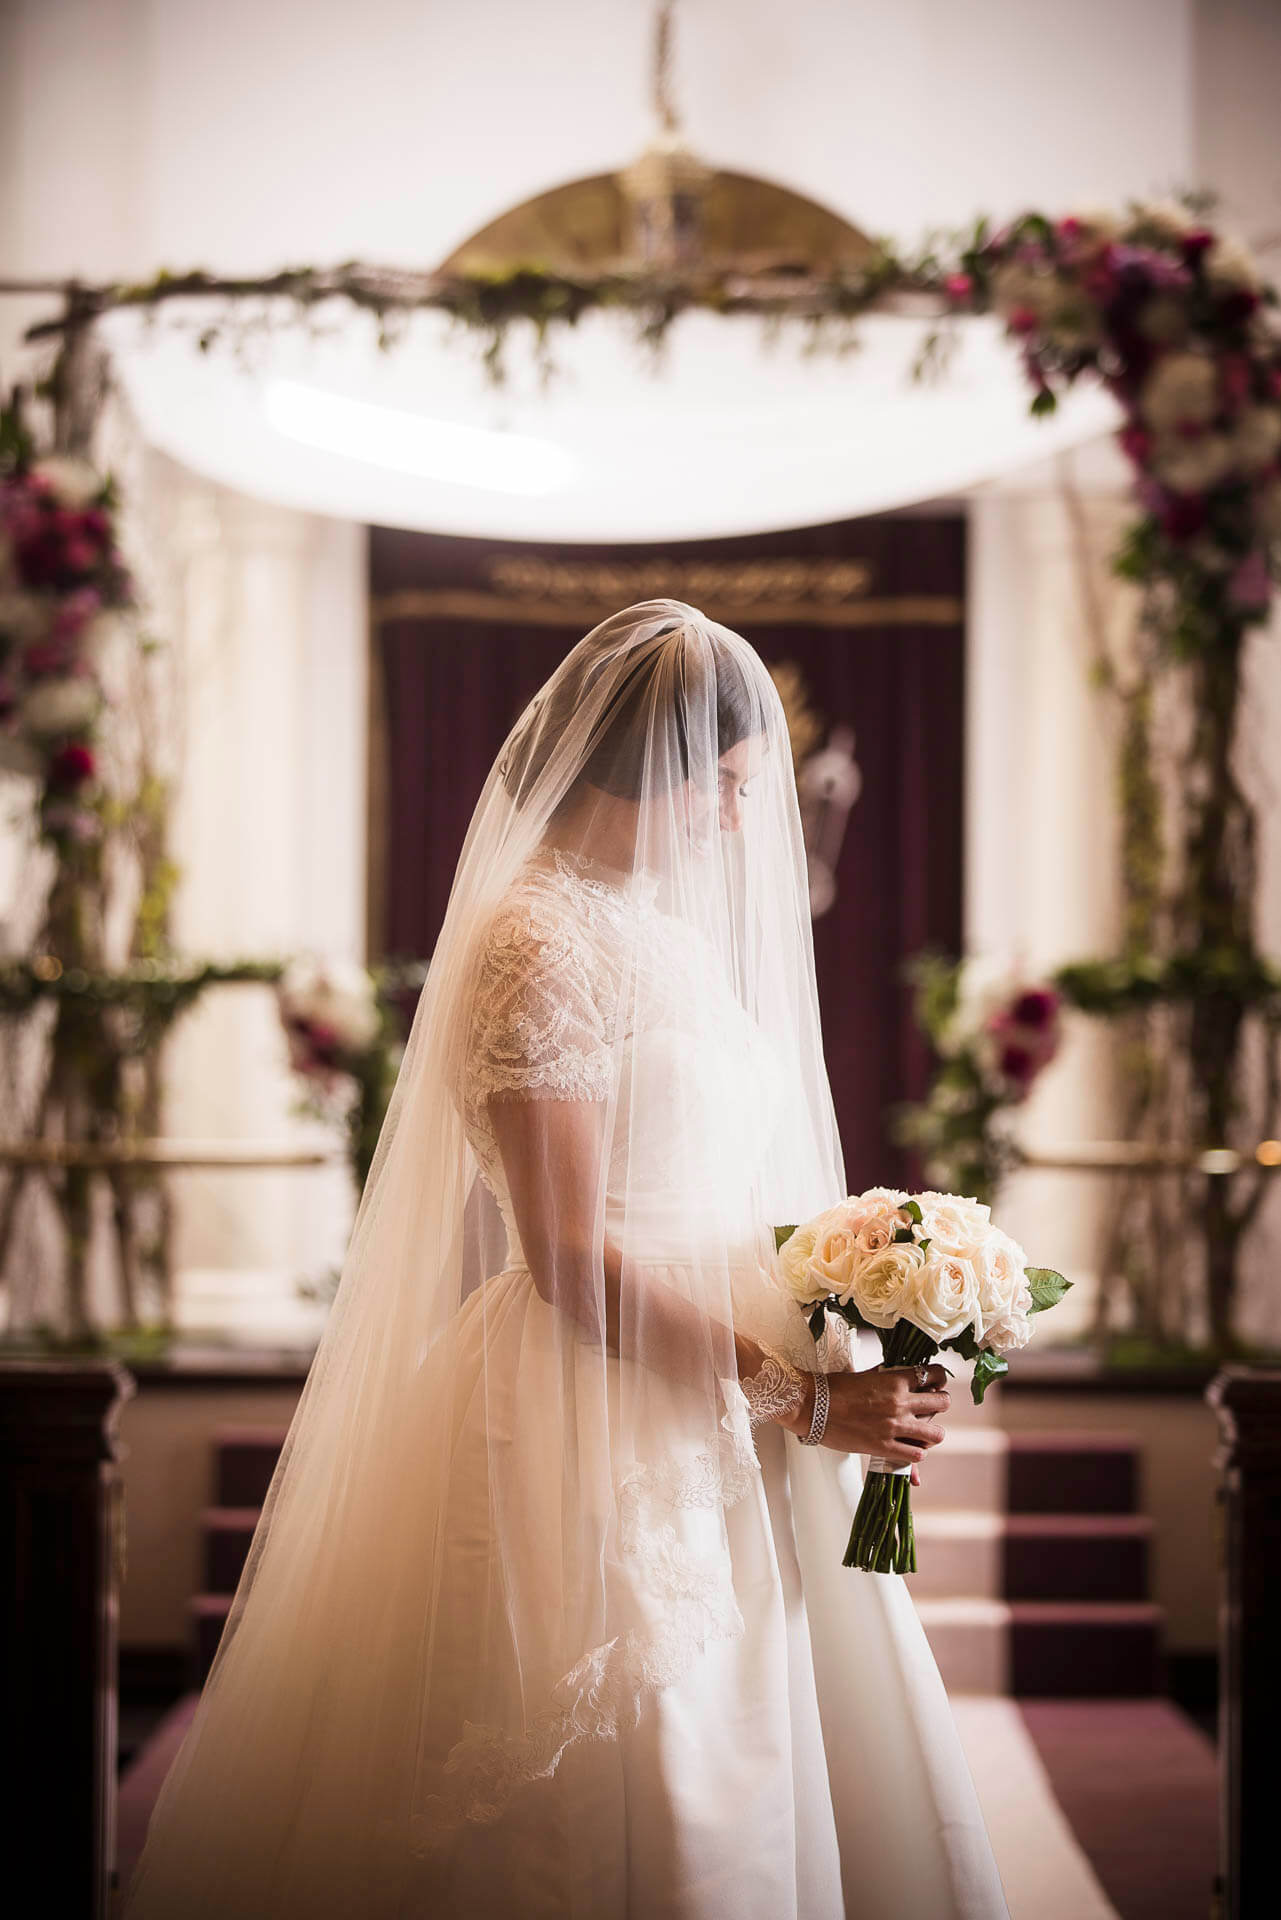 bride with veil over face and bouquet